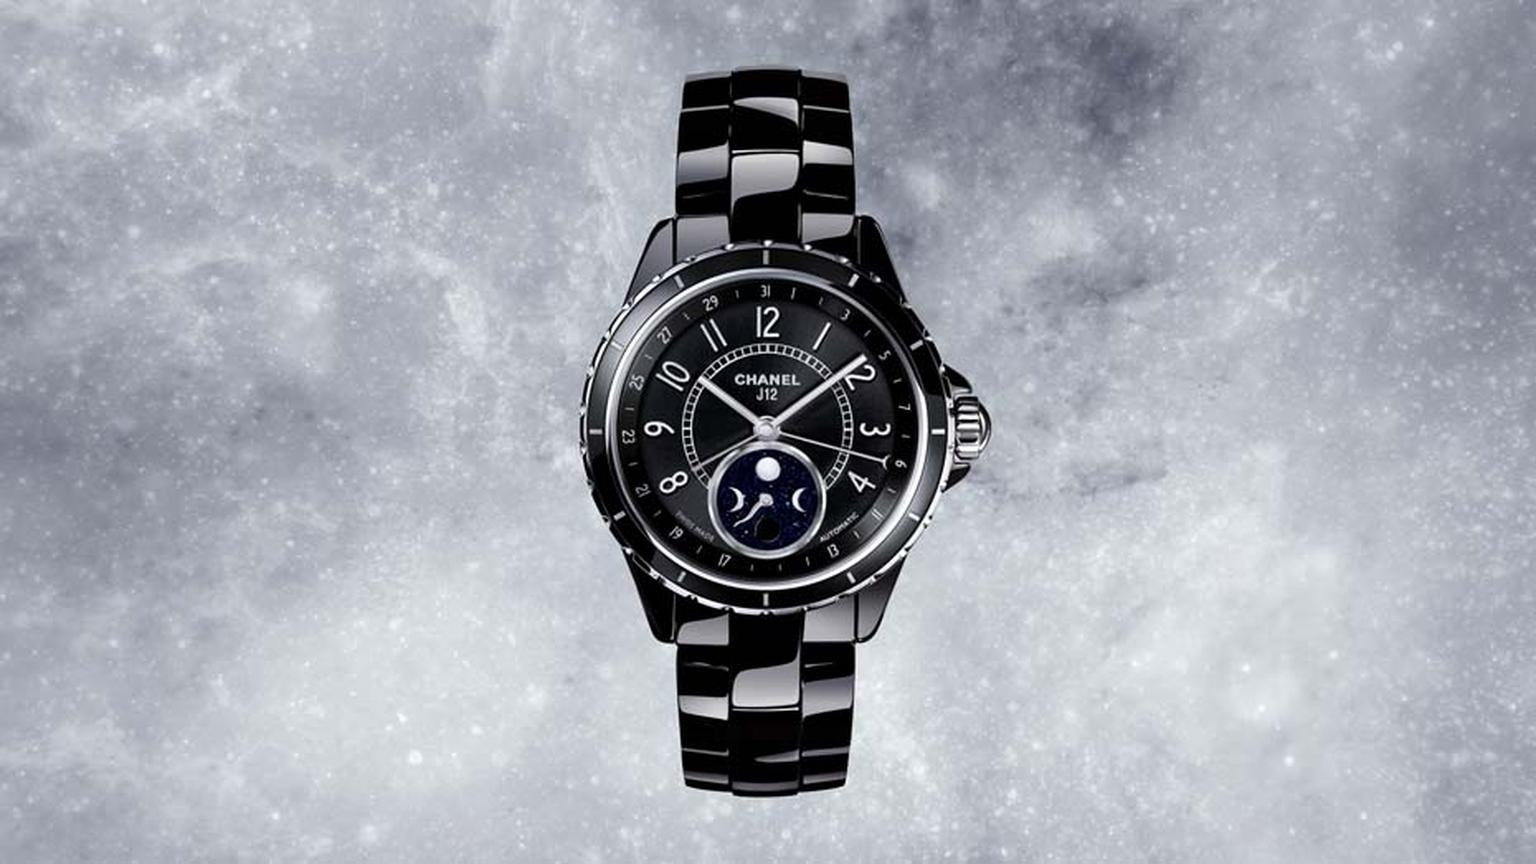 Chanel's iconic J12 ceramic watch features a blue aventurine Moon phase counter